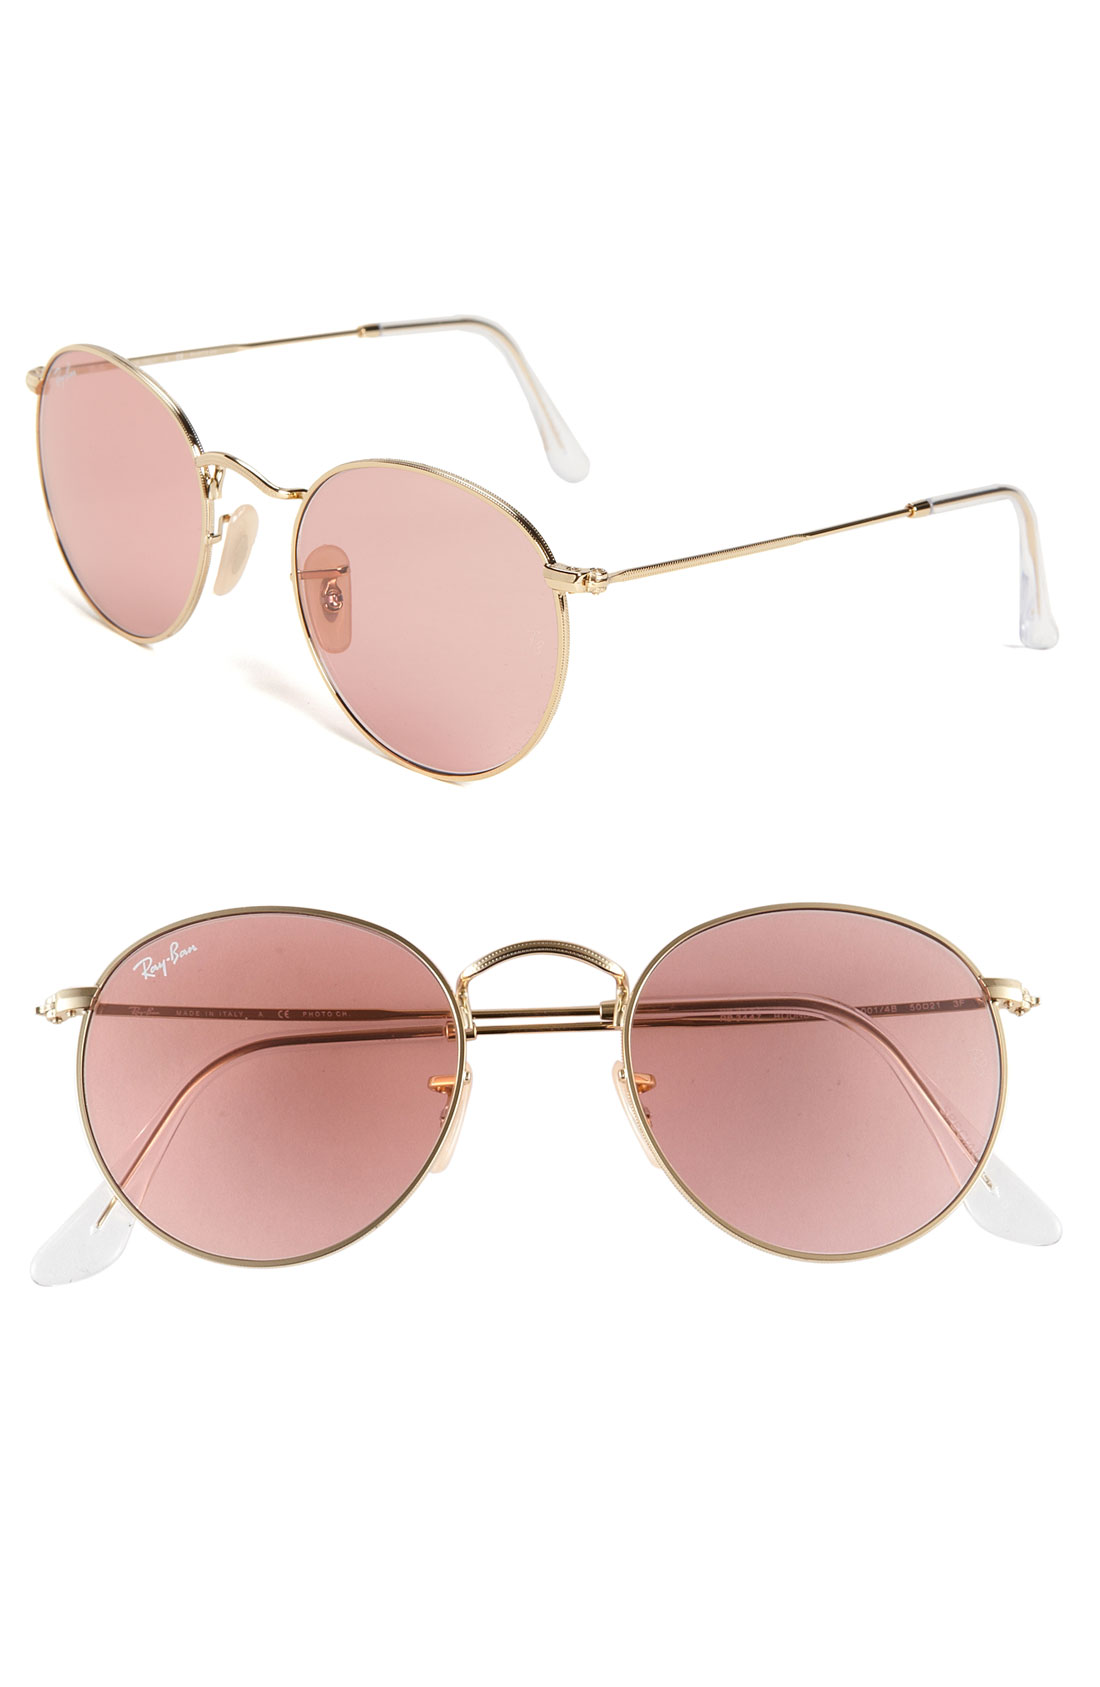 Ray-ban Legend Collection Round Metal Sunglasses in Brown (gold/ rose ...